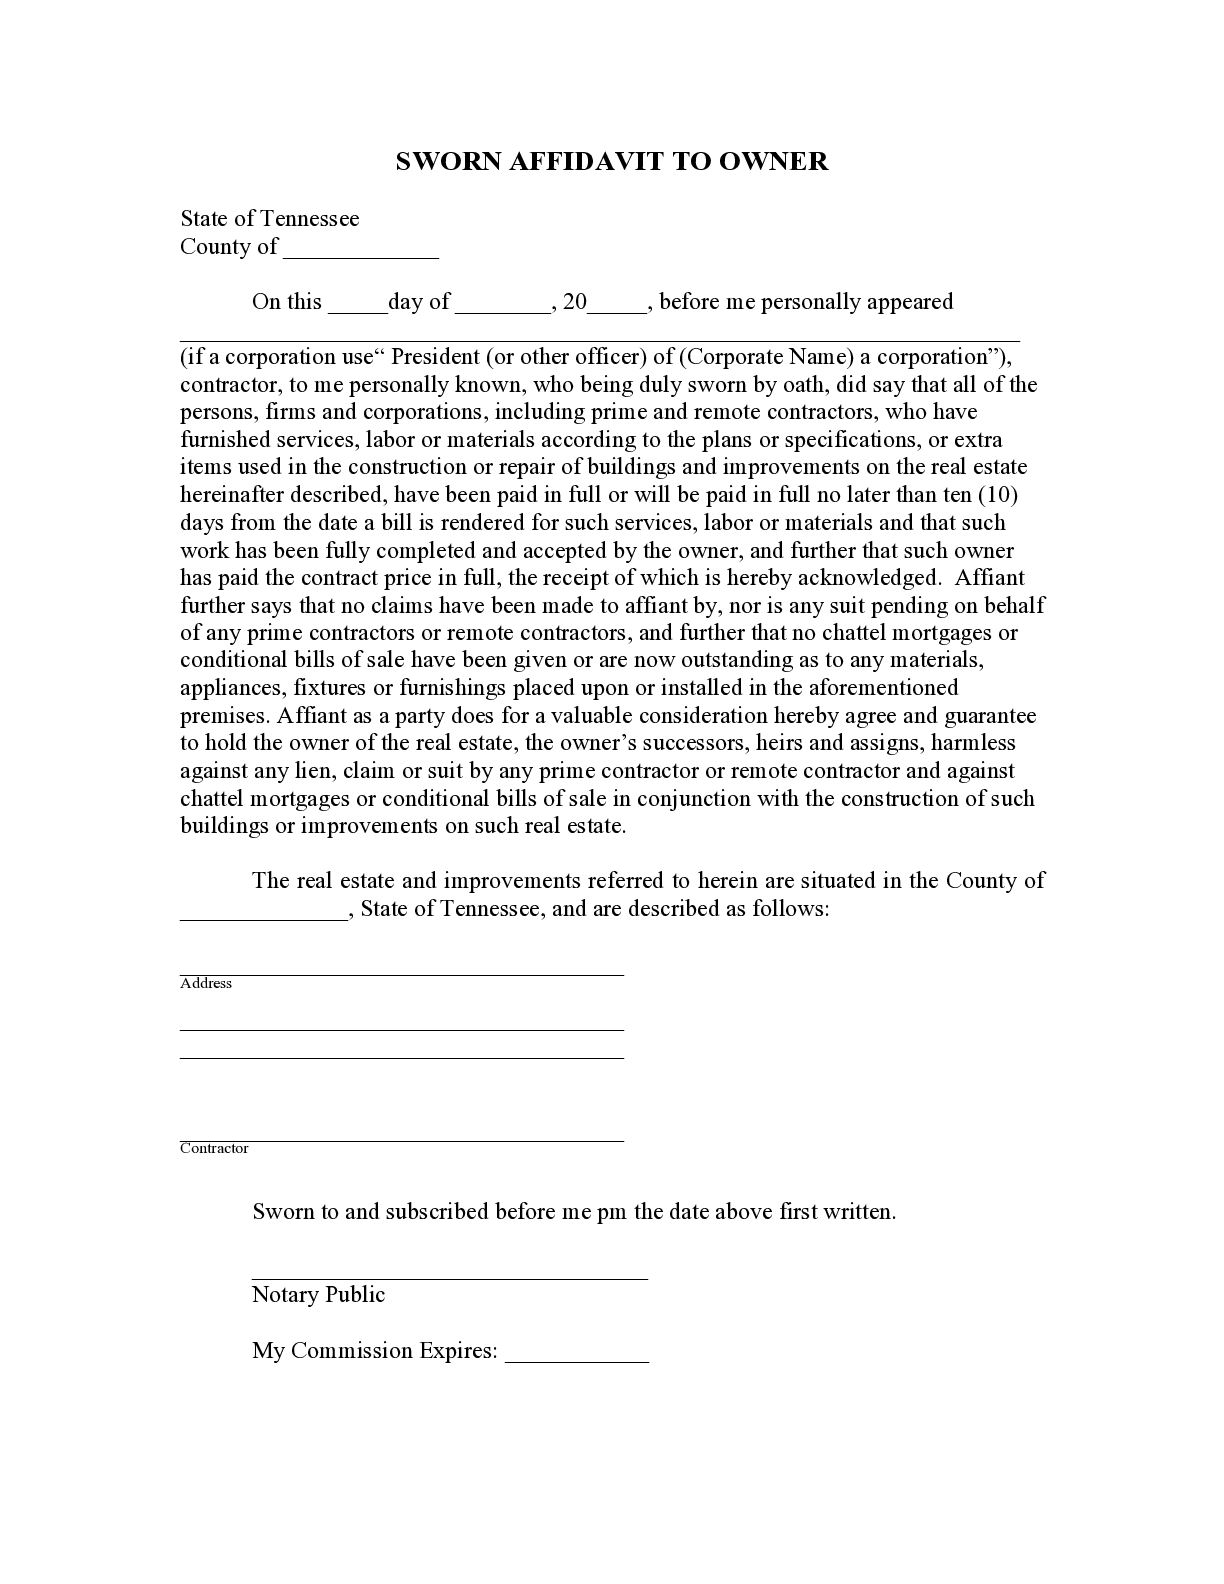 Tennessee Sworn Affidavit to Owner Form - free from